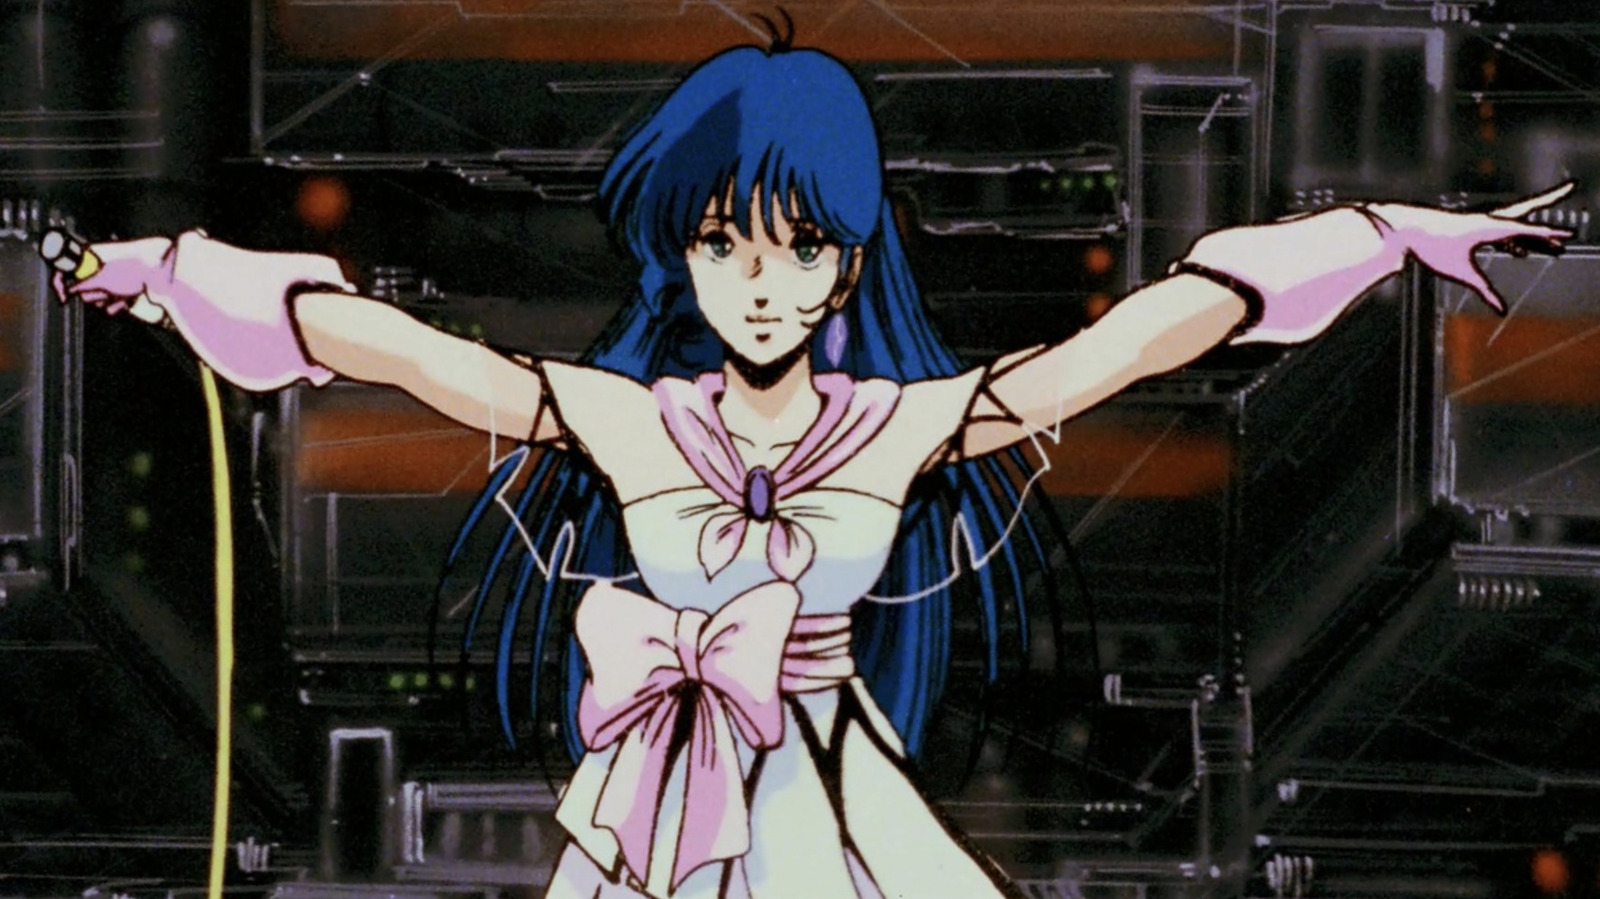 10 Underrated 80s Anime Movies Worth ReWatching